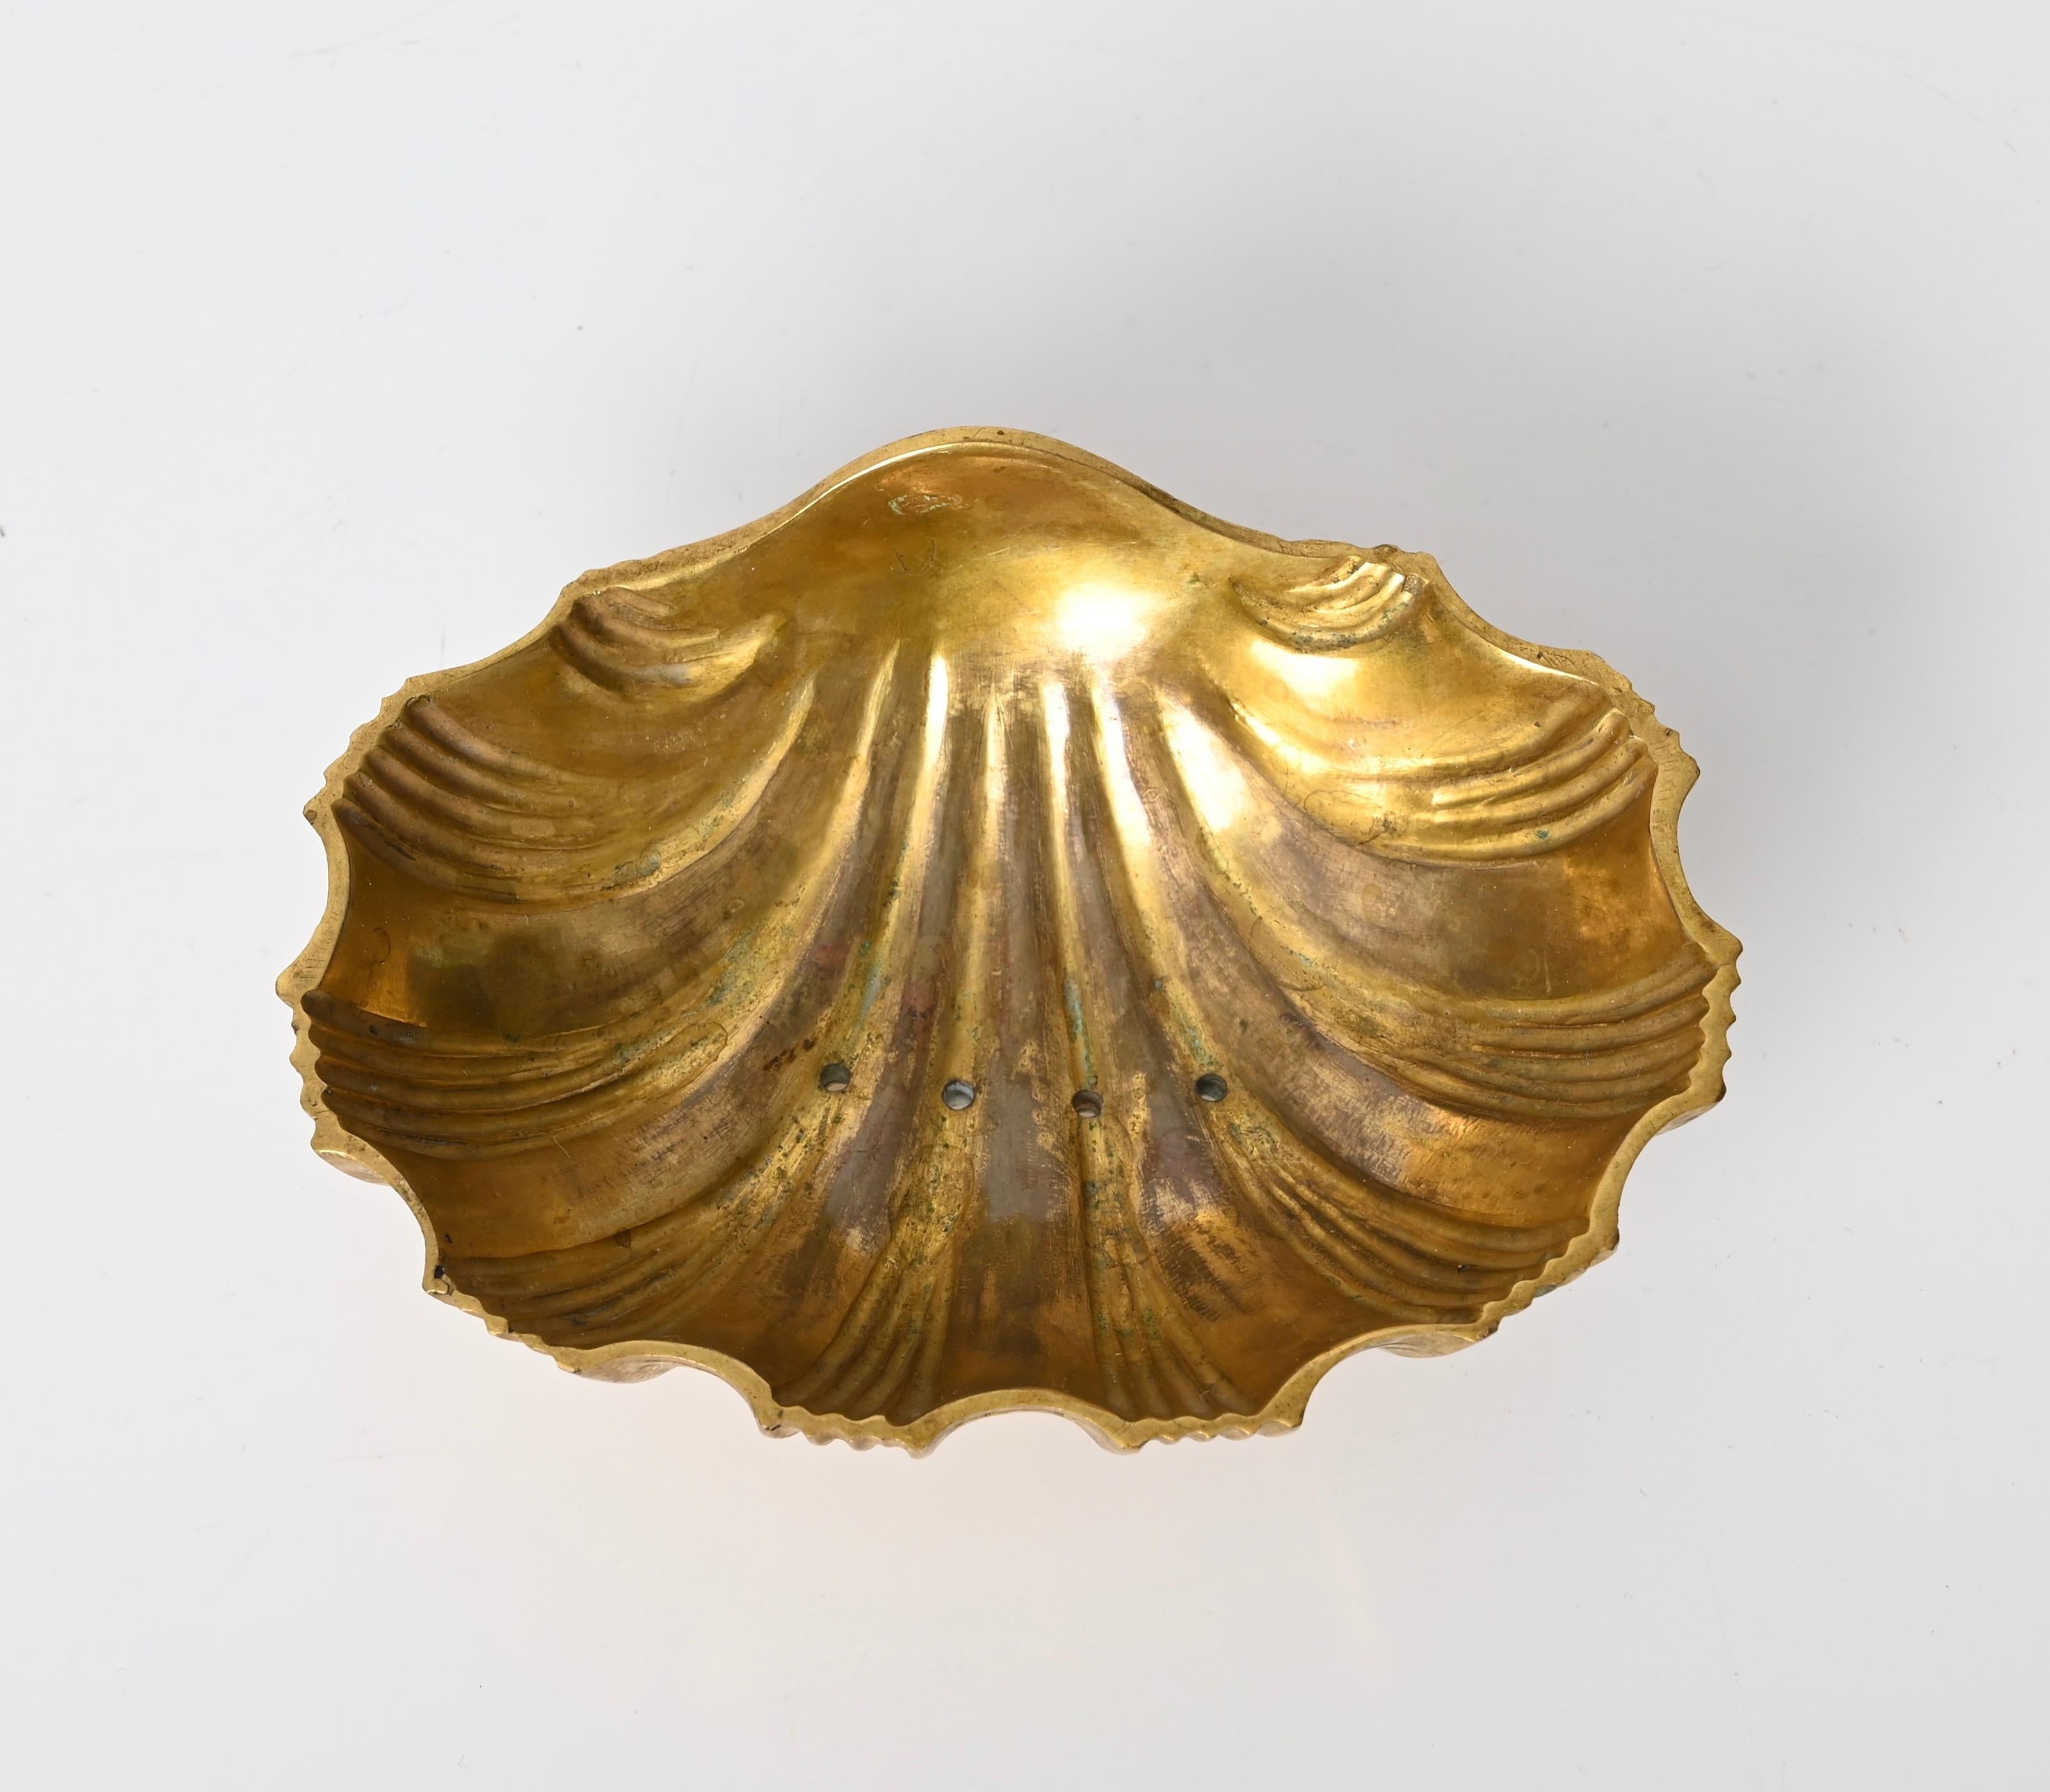 20th Century Mid-Century Pair of Shell-Shaped Soap Dishes in Gilt Bronze, Italy 1950s For Sale